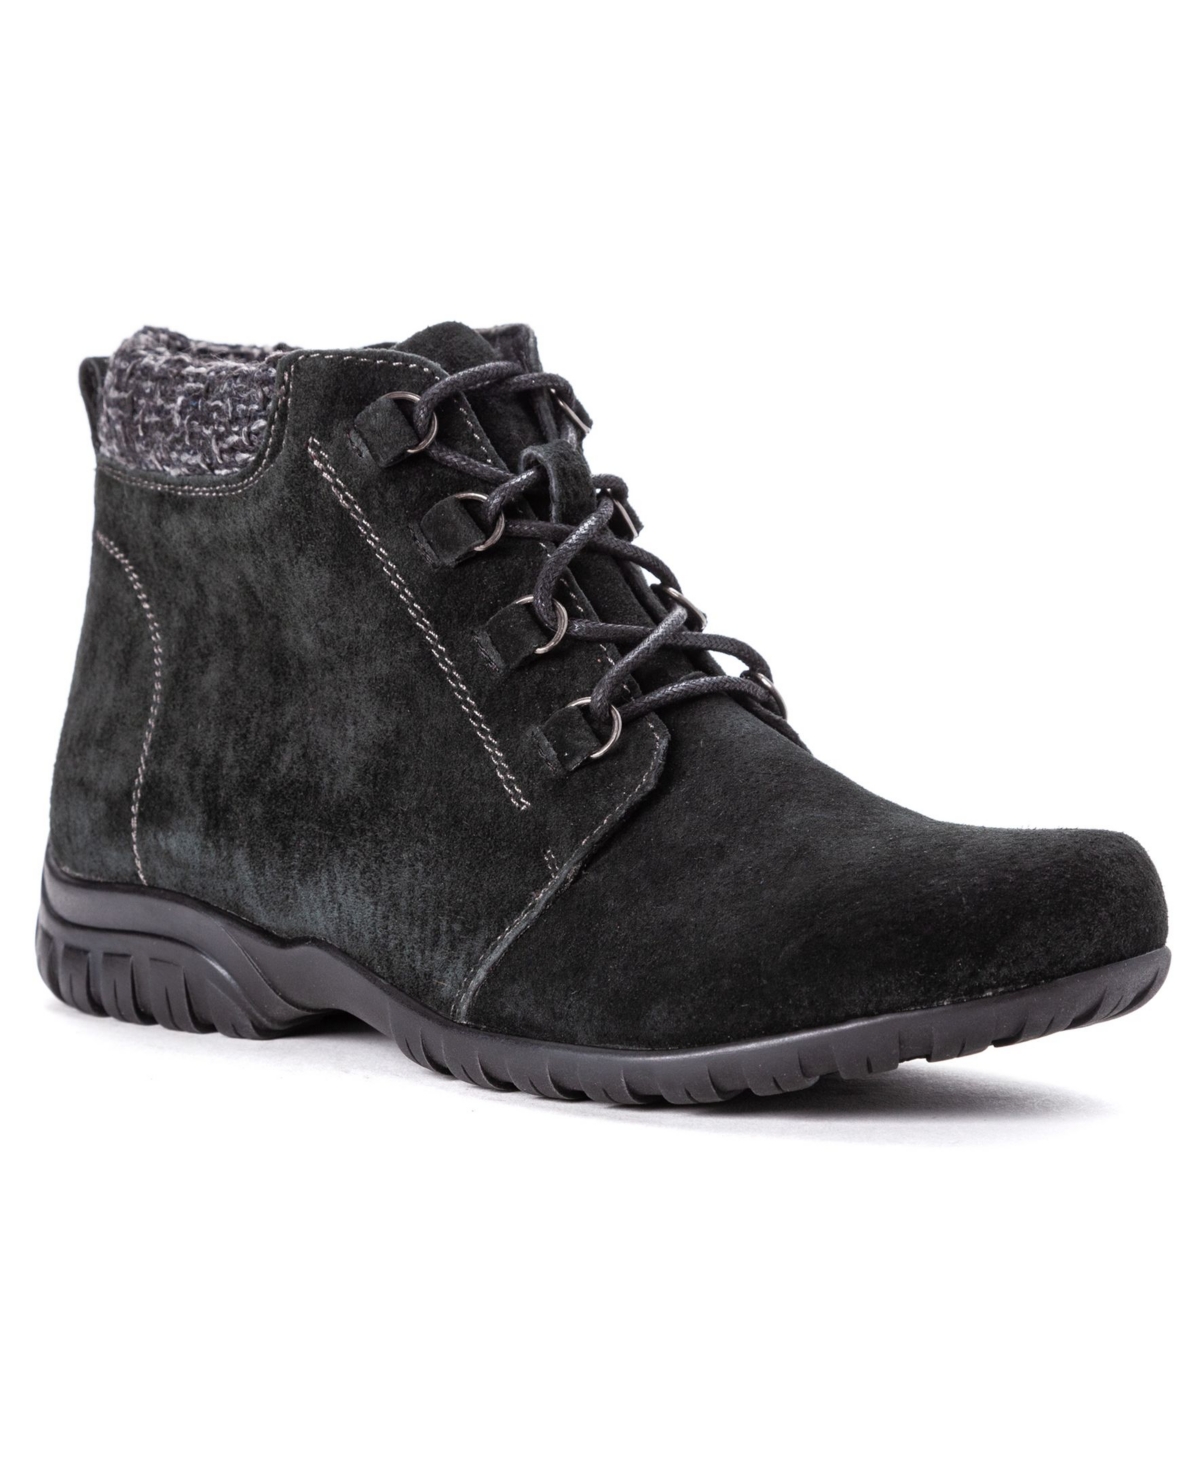 Women's Delaney Ankle Booties - Gray